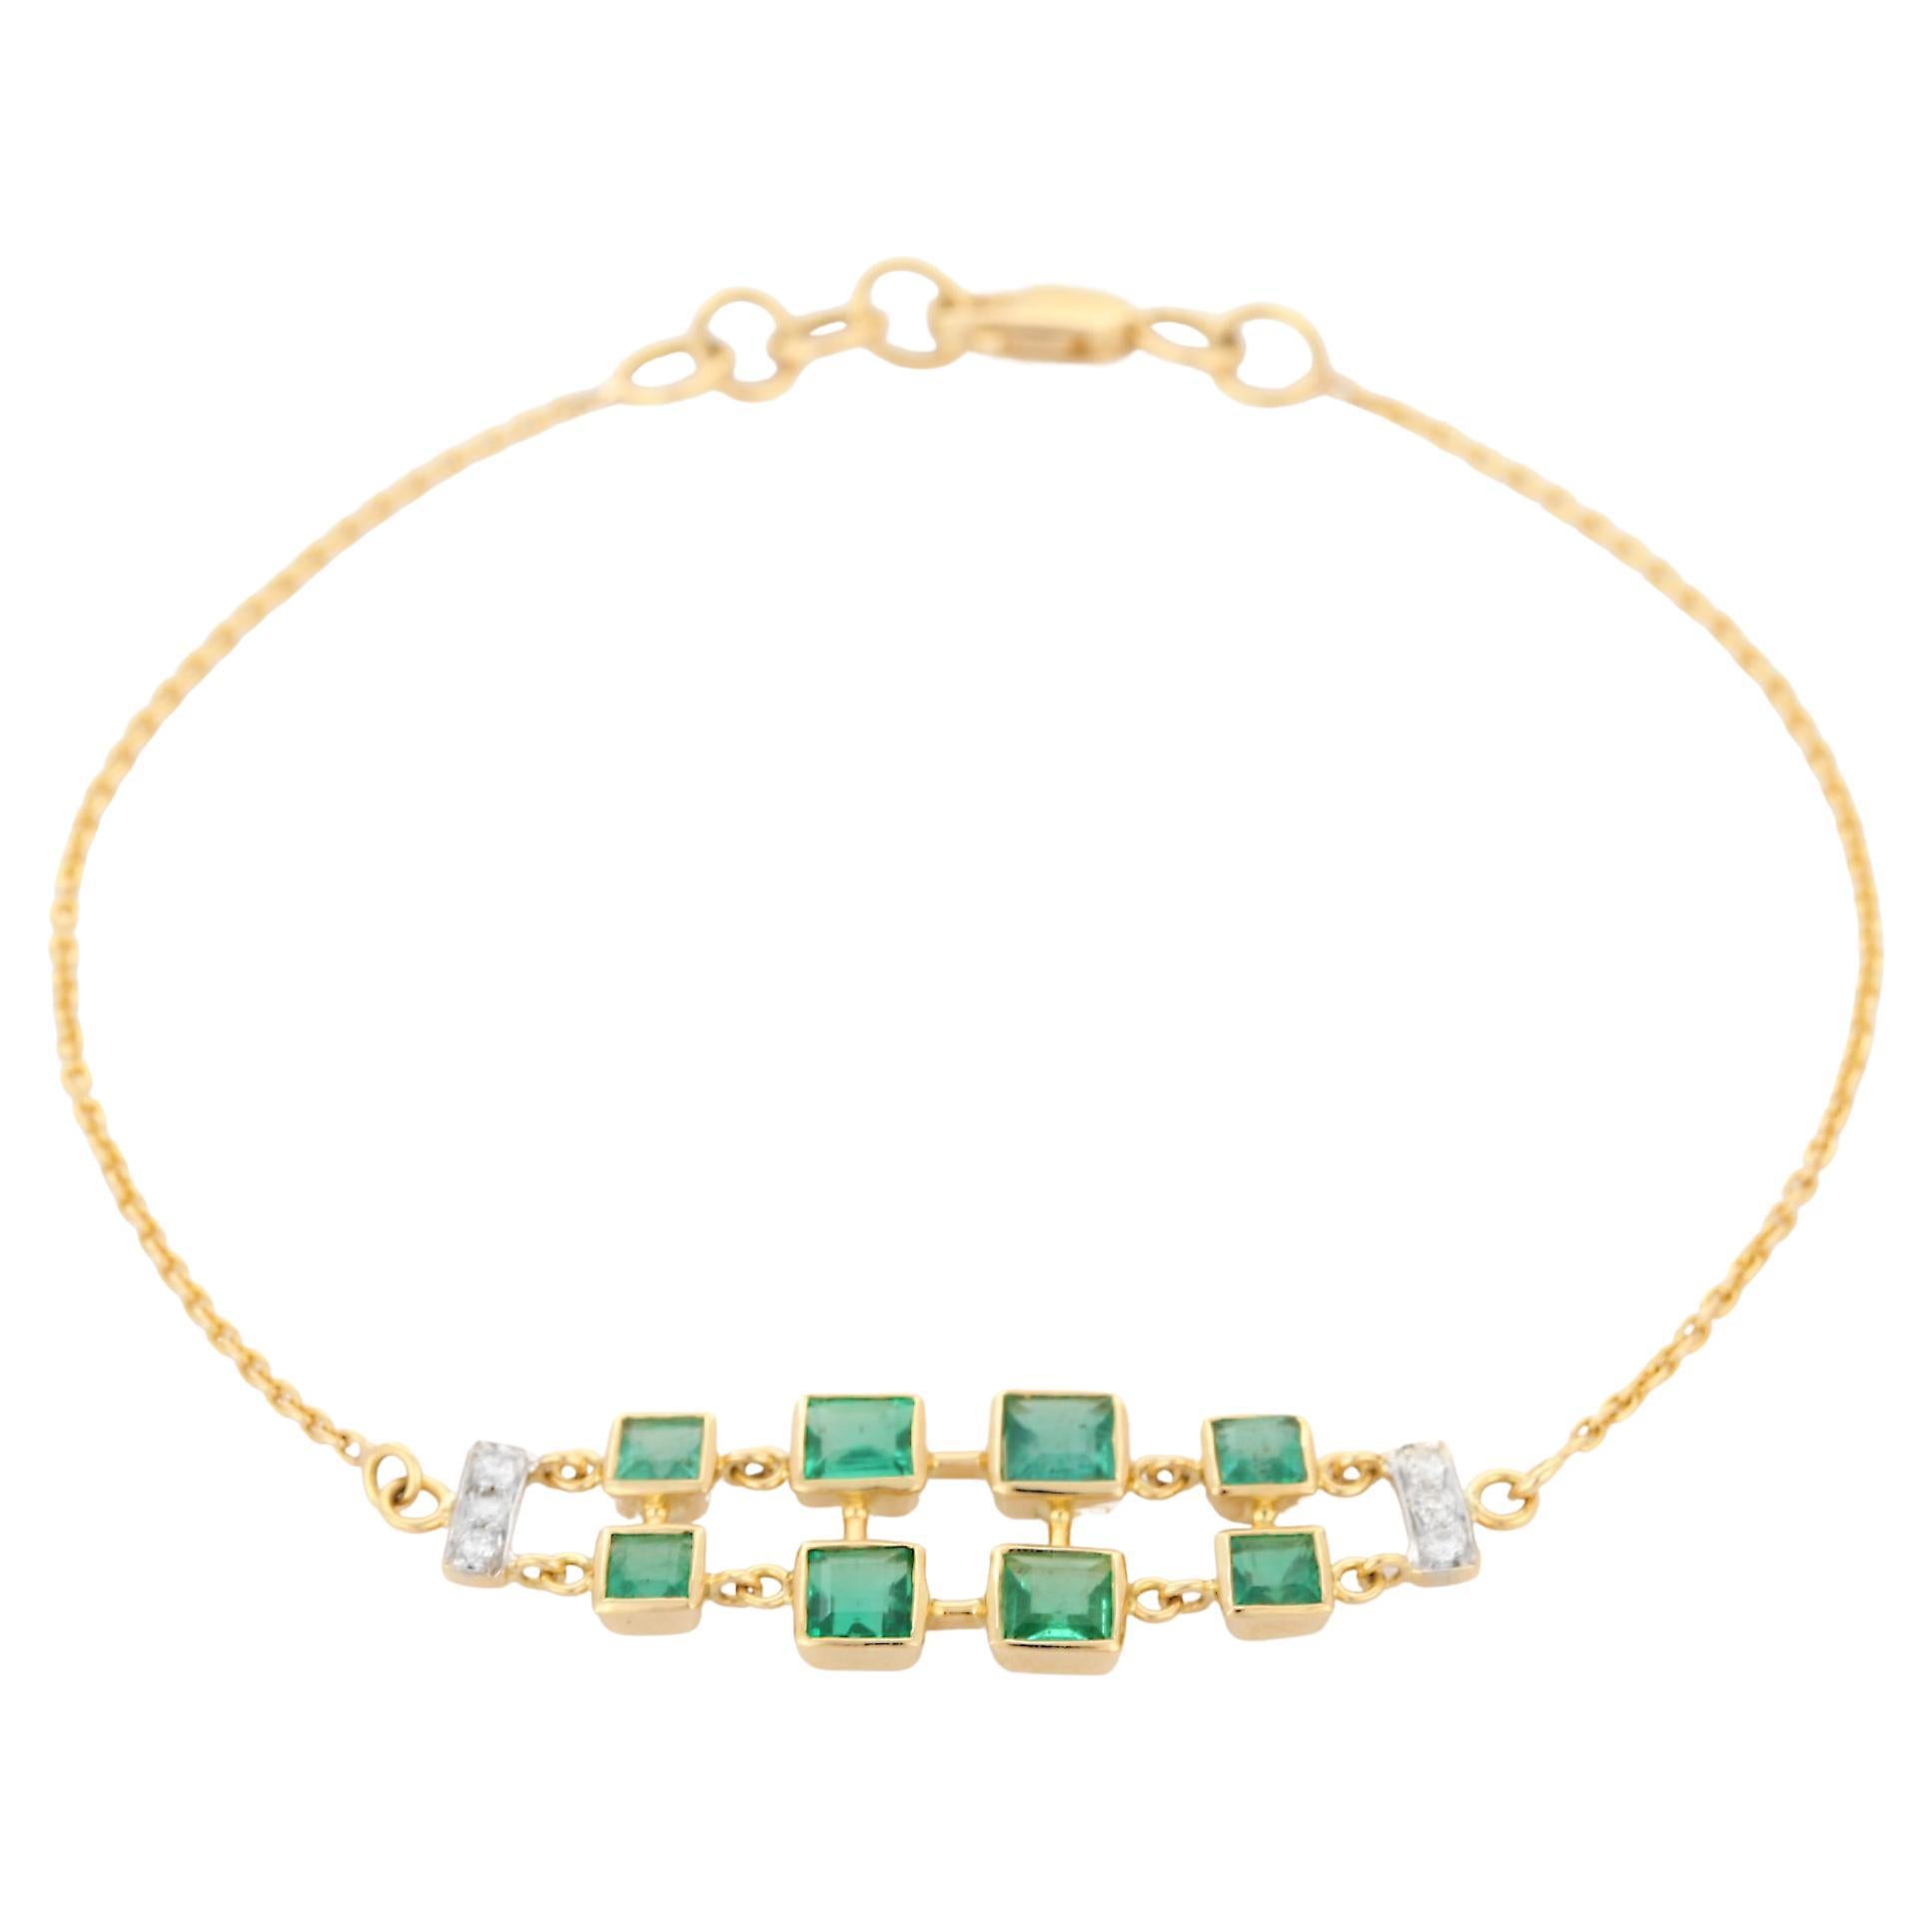 Distinctive Square Cut Emerald and Diamond Bracelet Studded in 18K Yellow Gold For Sale